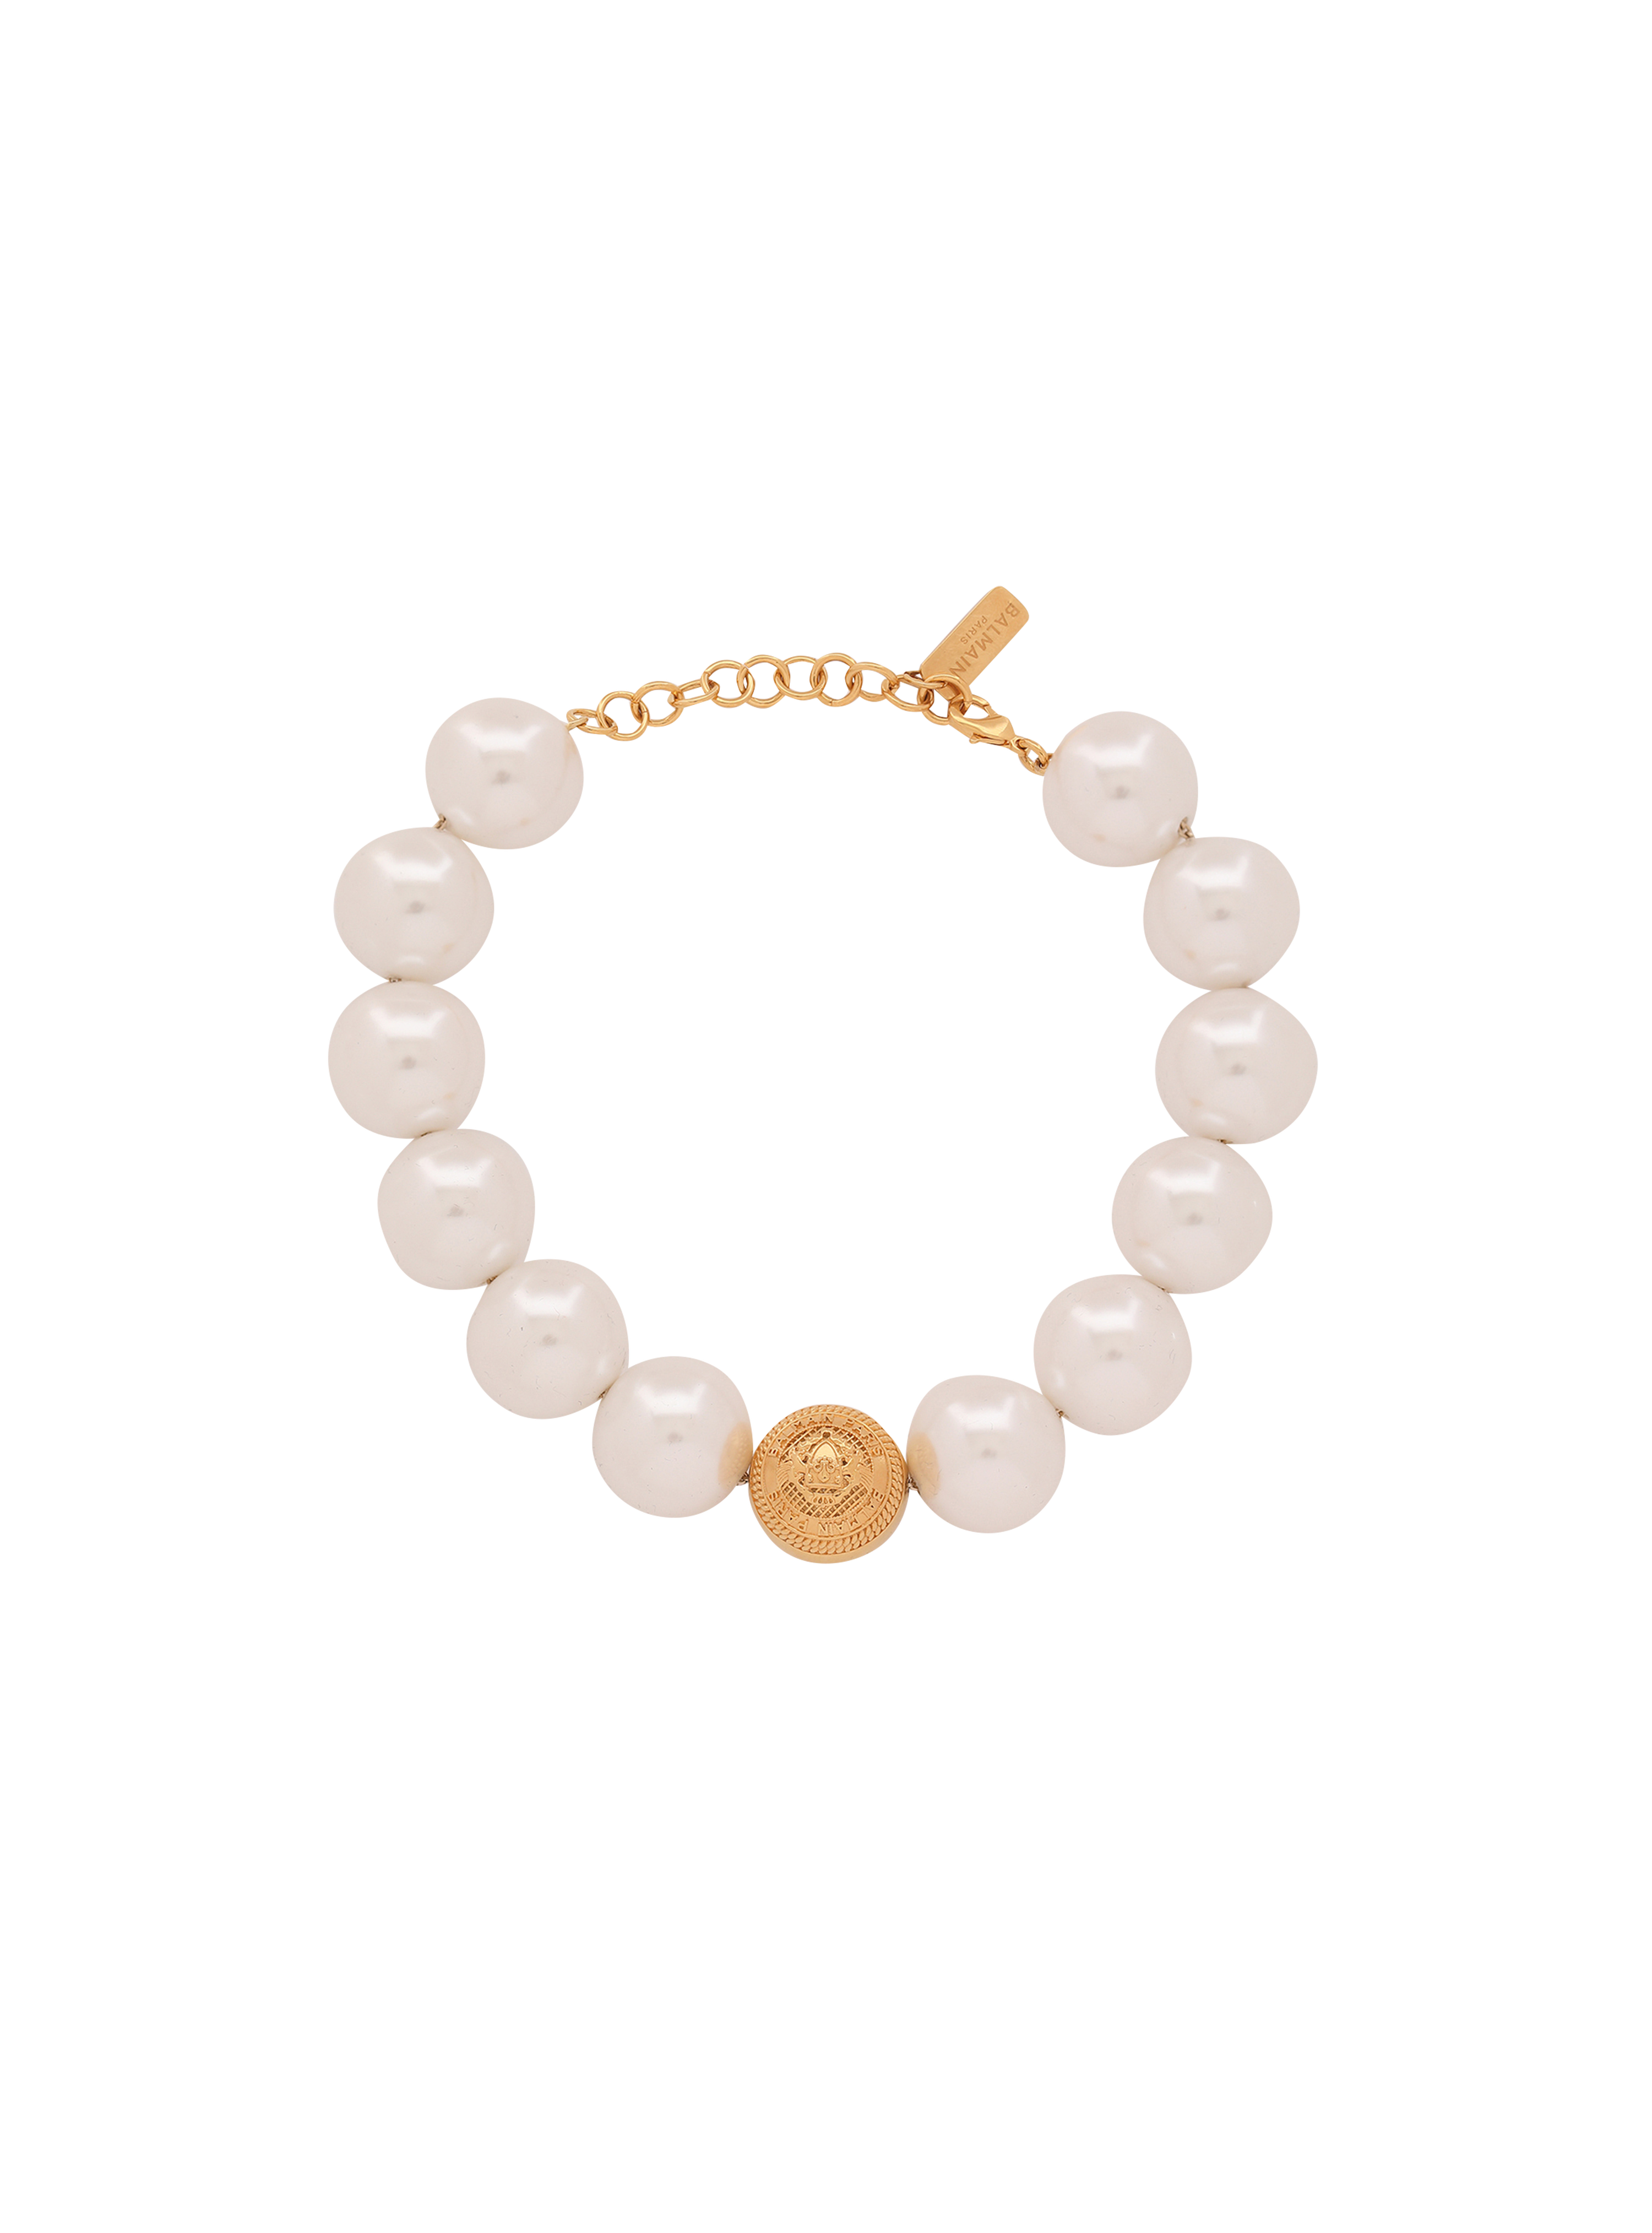 Gold-tone brass Coin choker necklace with pearls, white